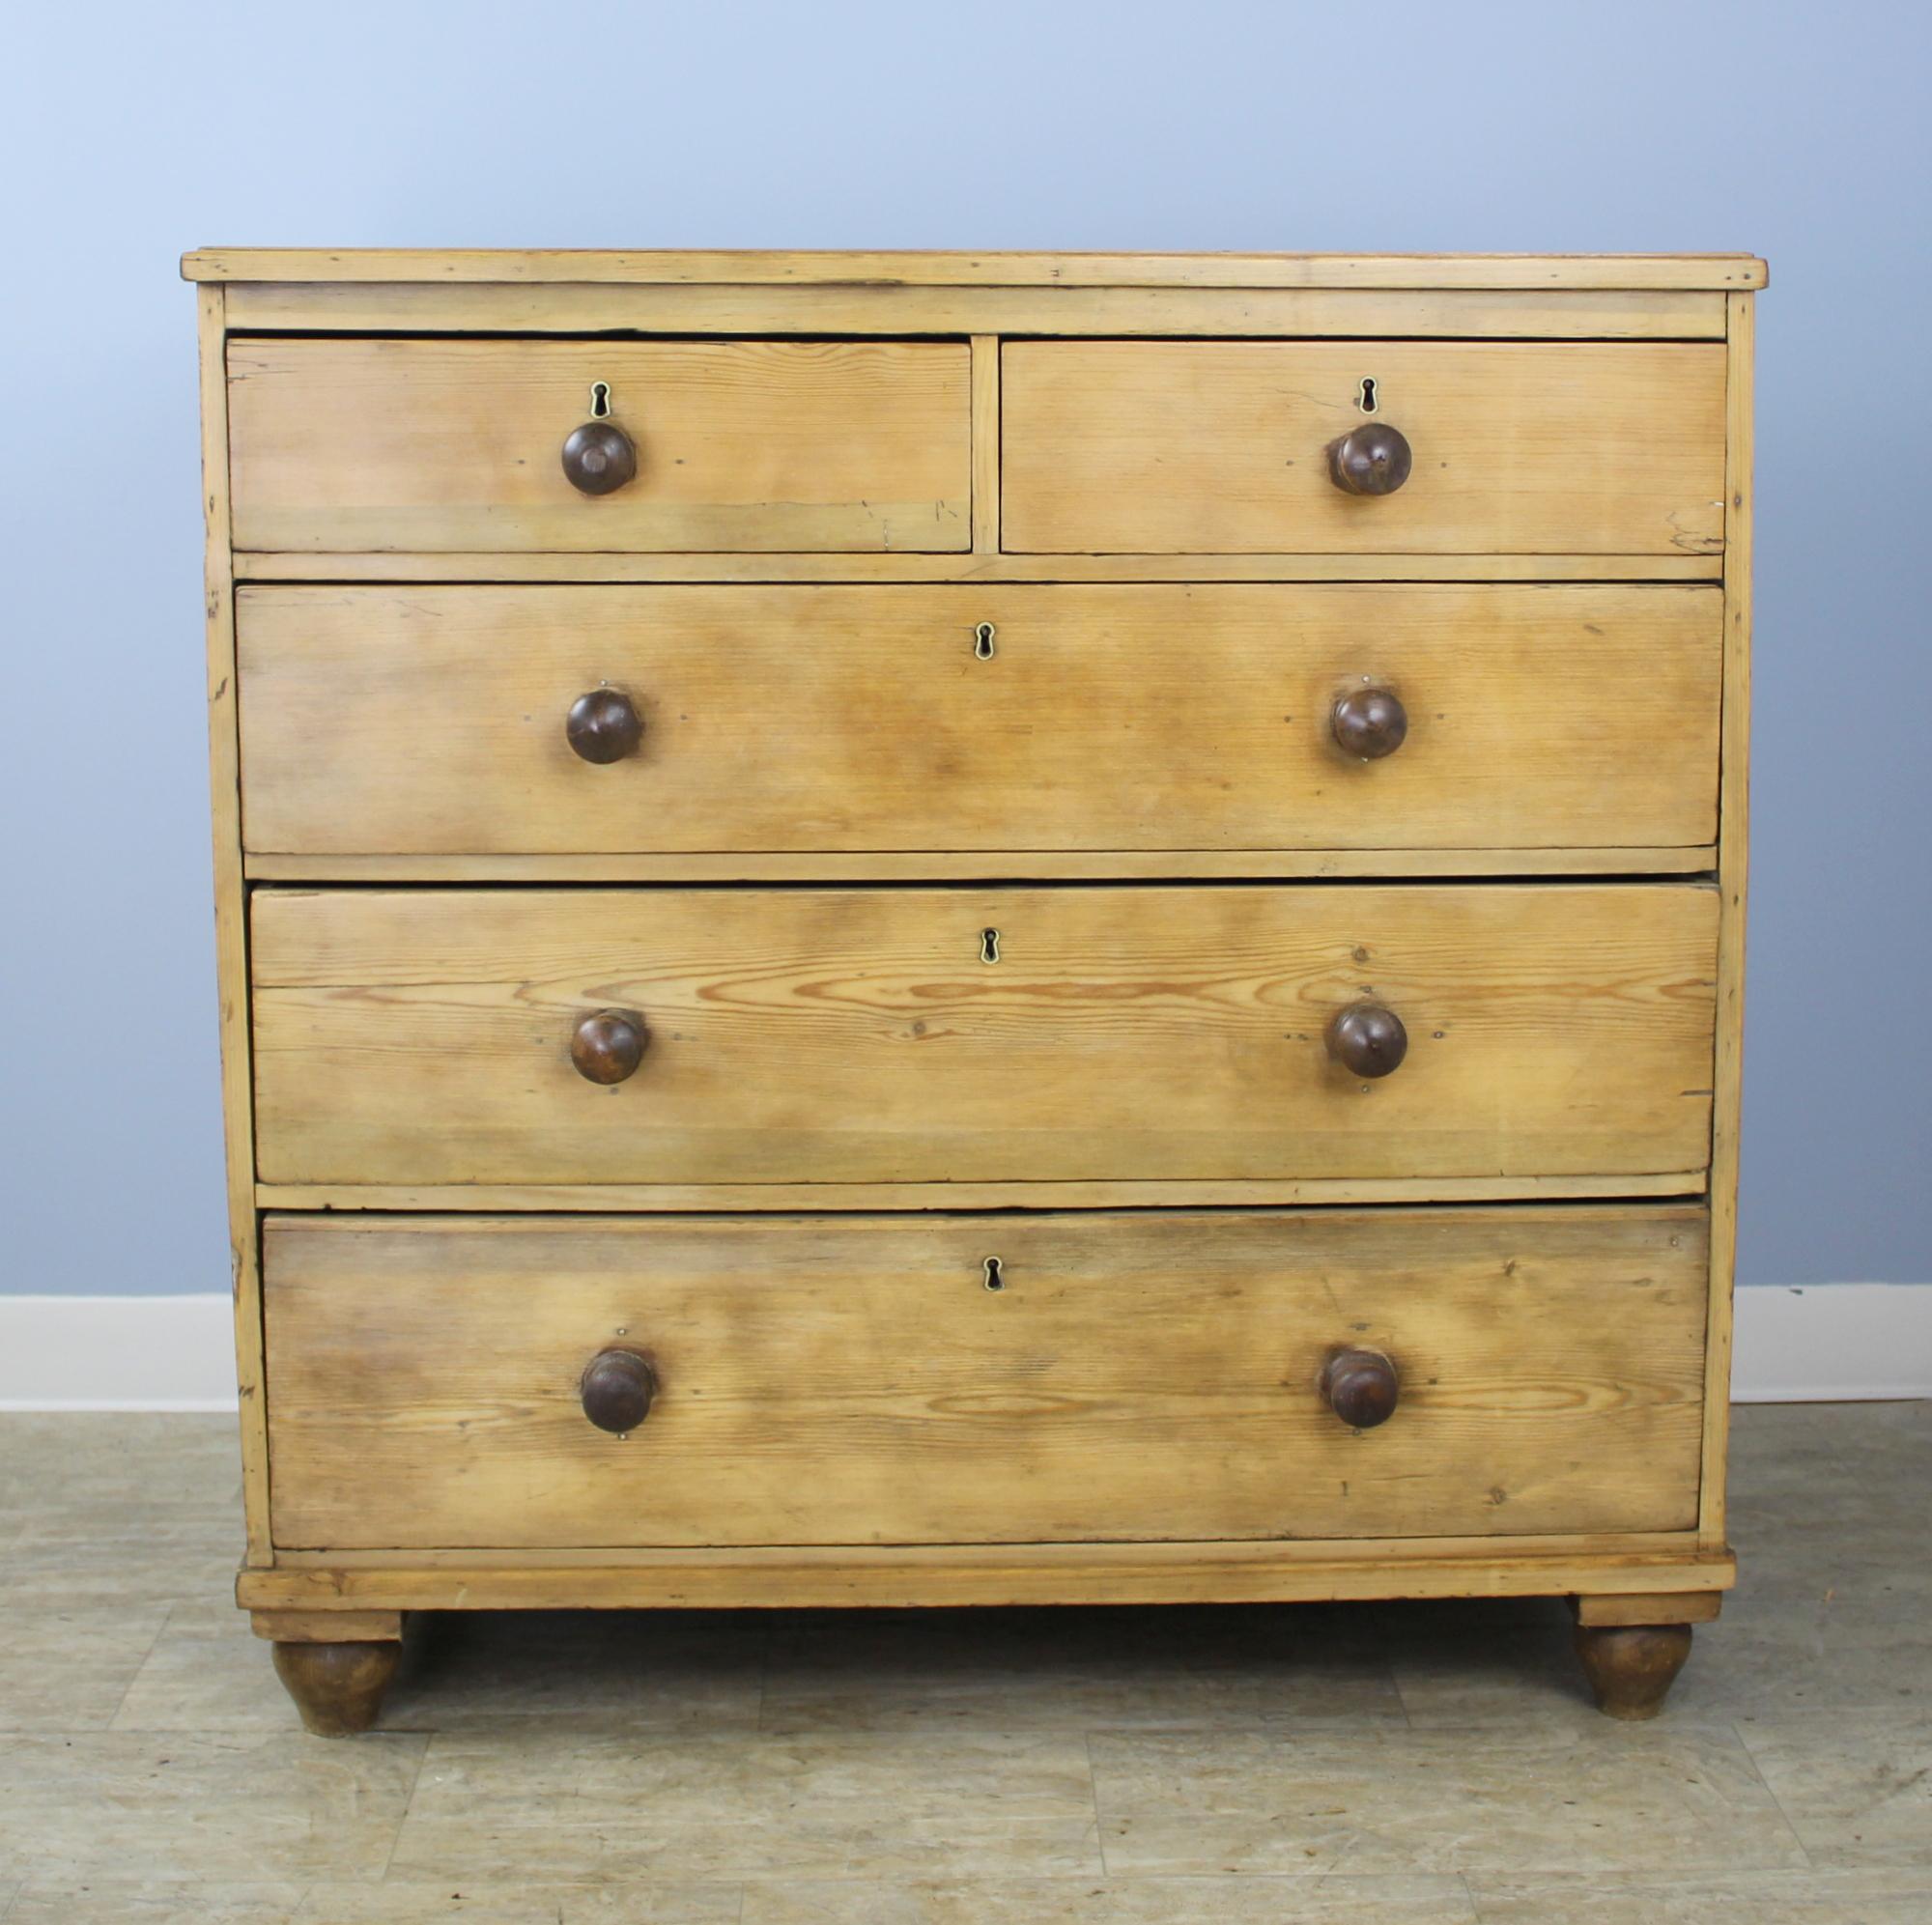 A classic early English pine chest of drawers, two over three construction. The wood has been scrubbed back and enriched with a dark wax polish to bring out the grain and natural pine color. Drawers run smoothly and have simple round knobs for a